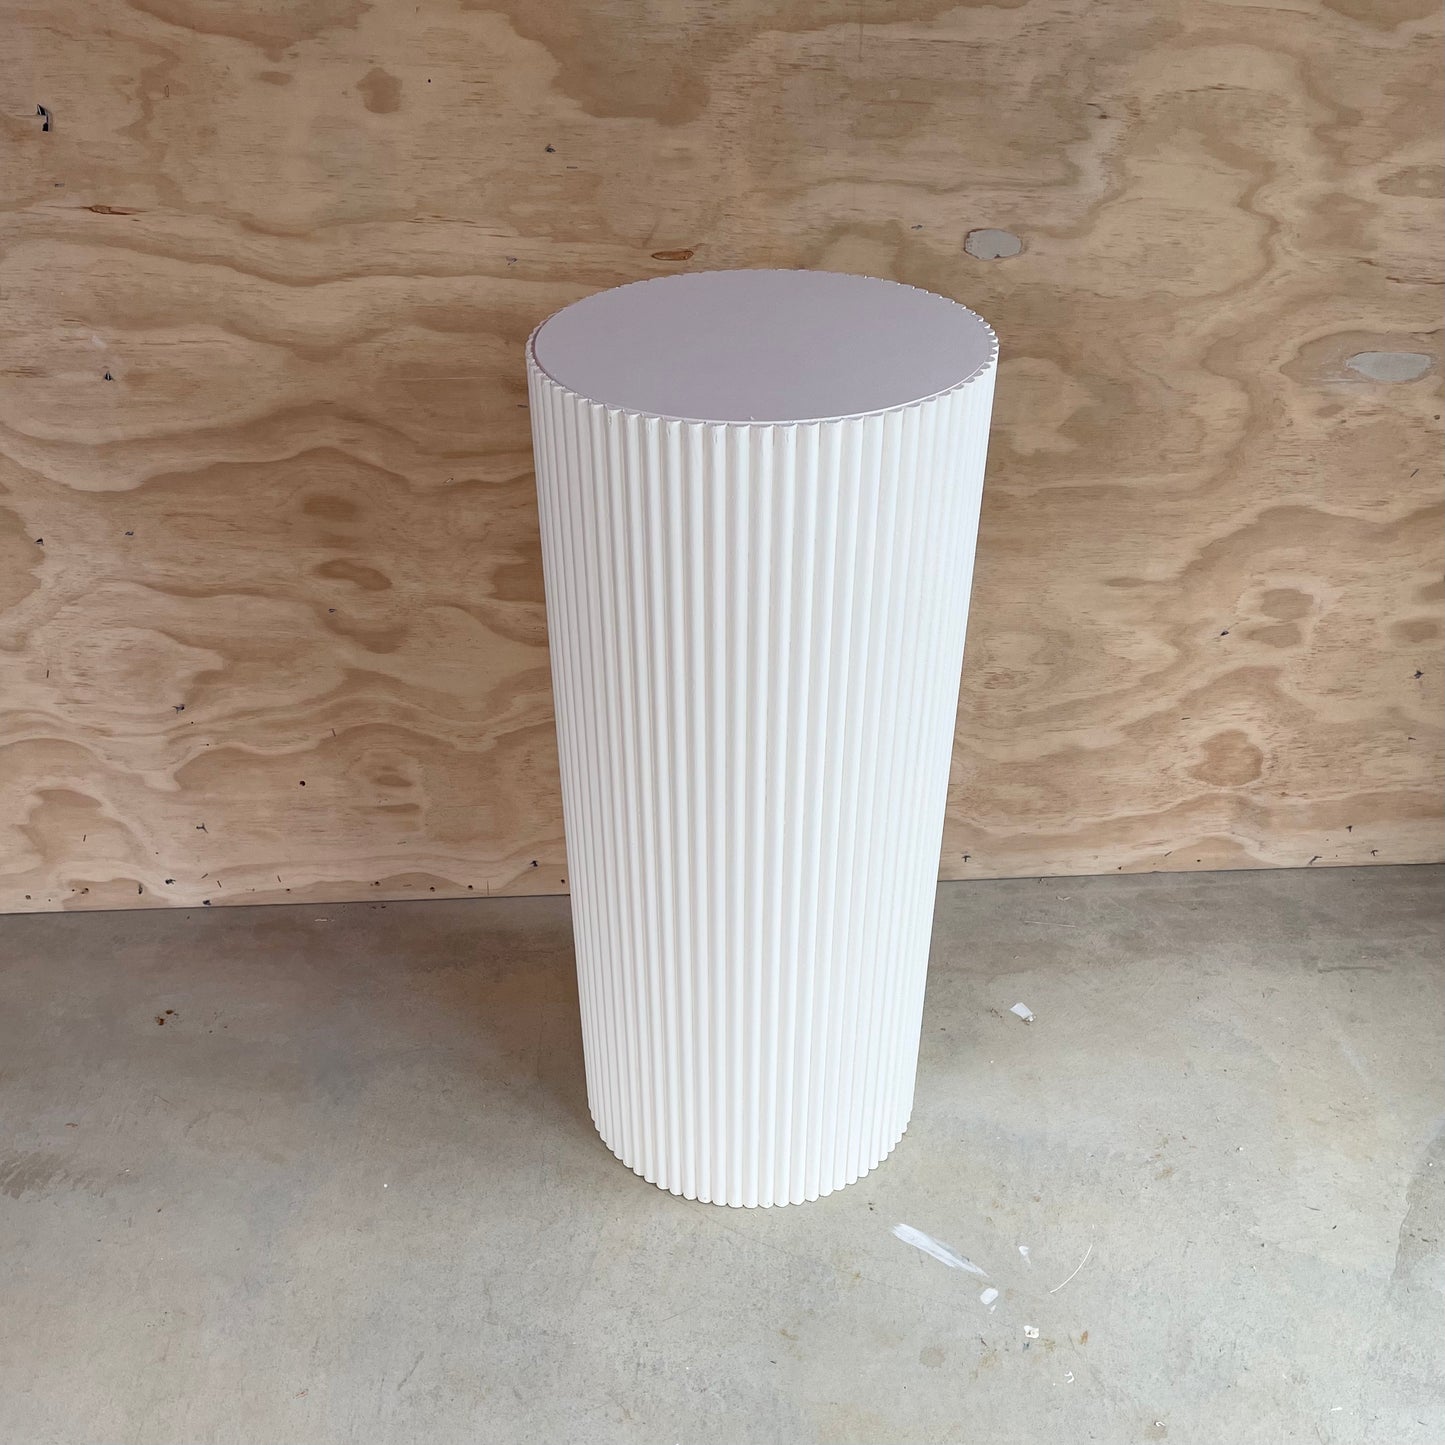 Cream Fluted plinth for hire Auckland